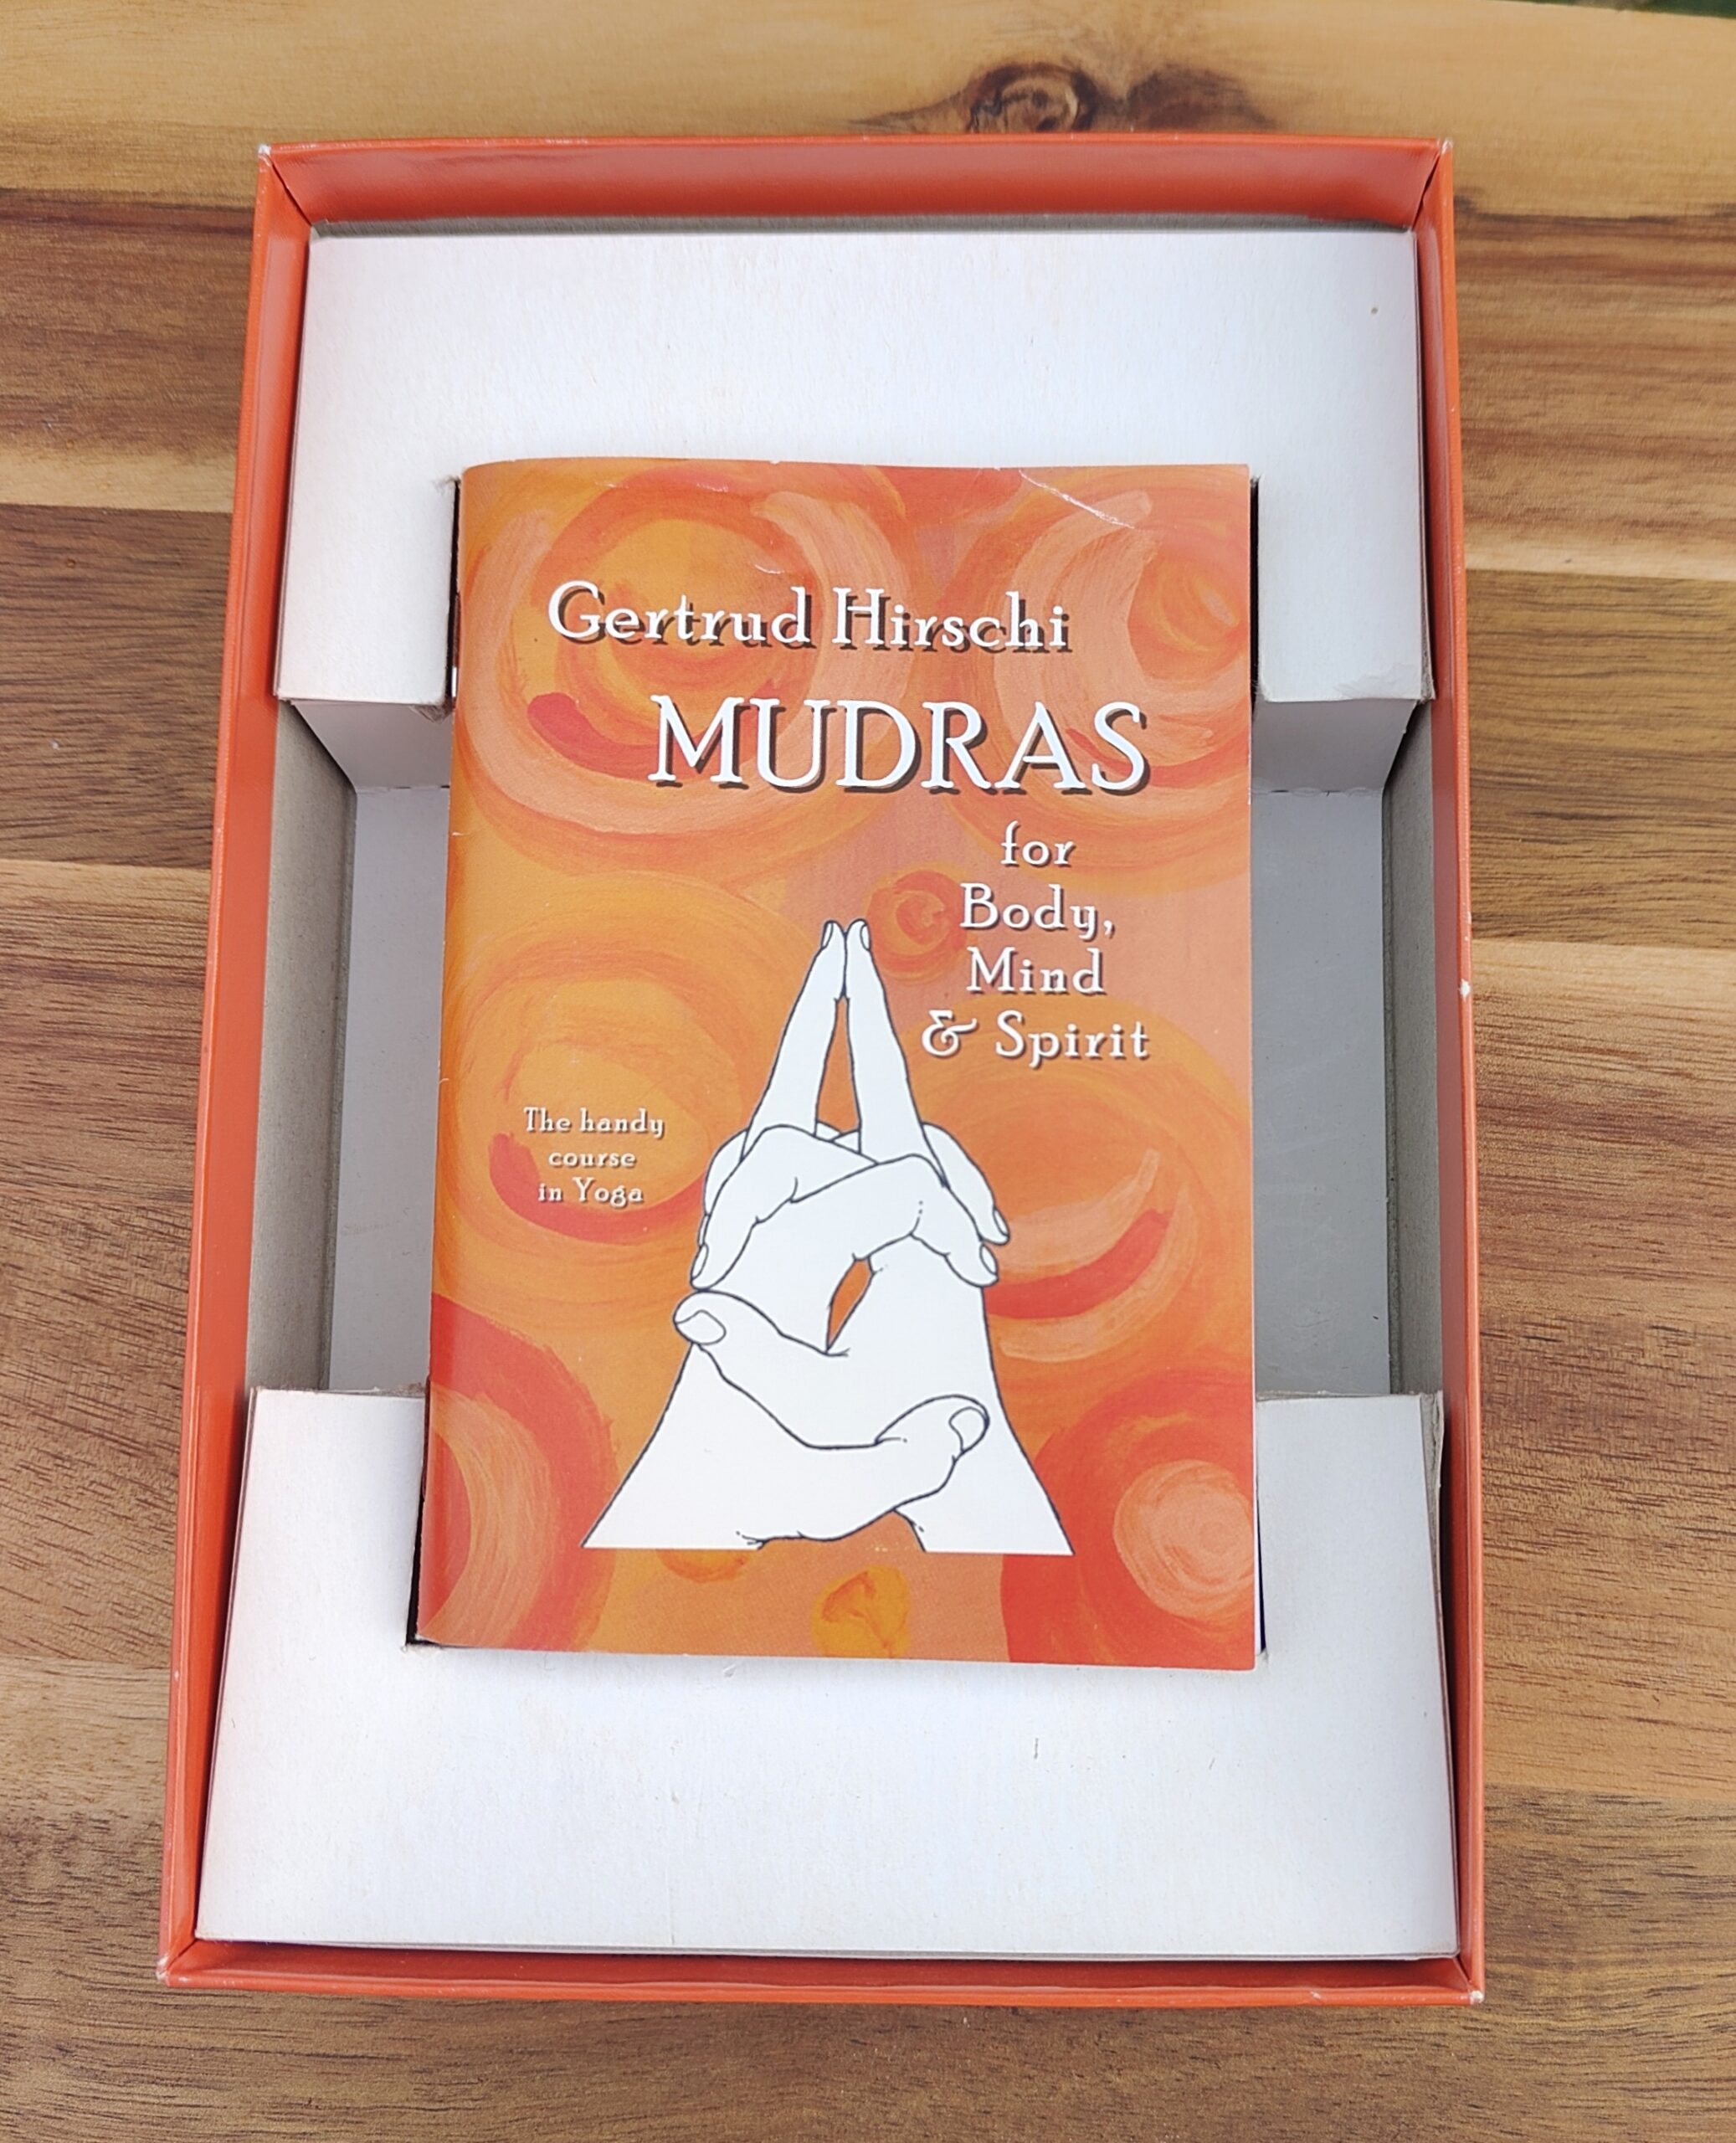 Mudras for Body, Mind & Spirit - The Hand Course in Yoga (2.Hand)